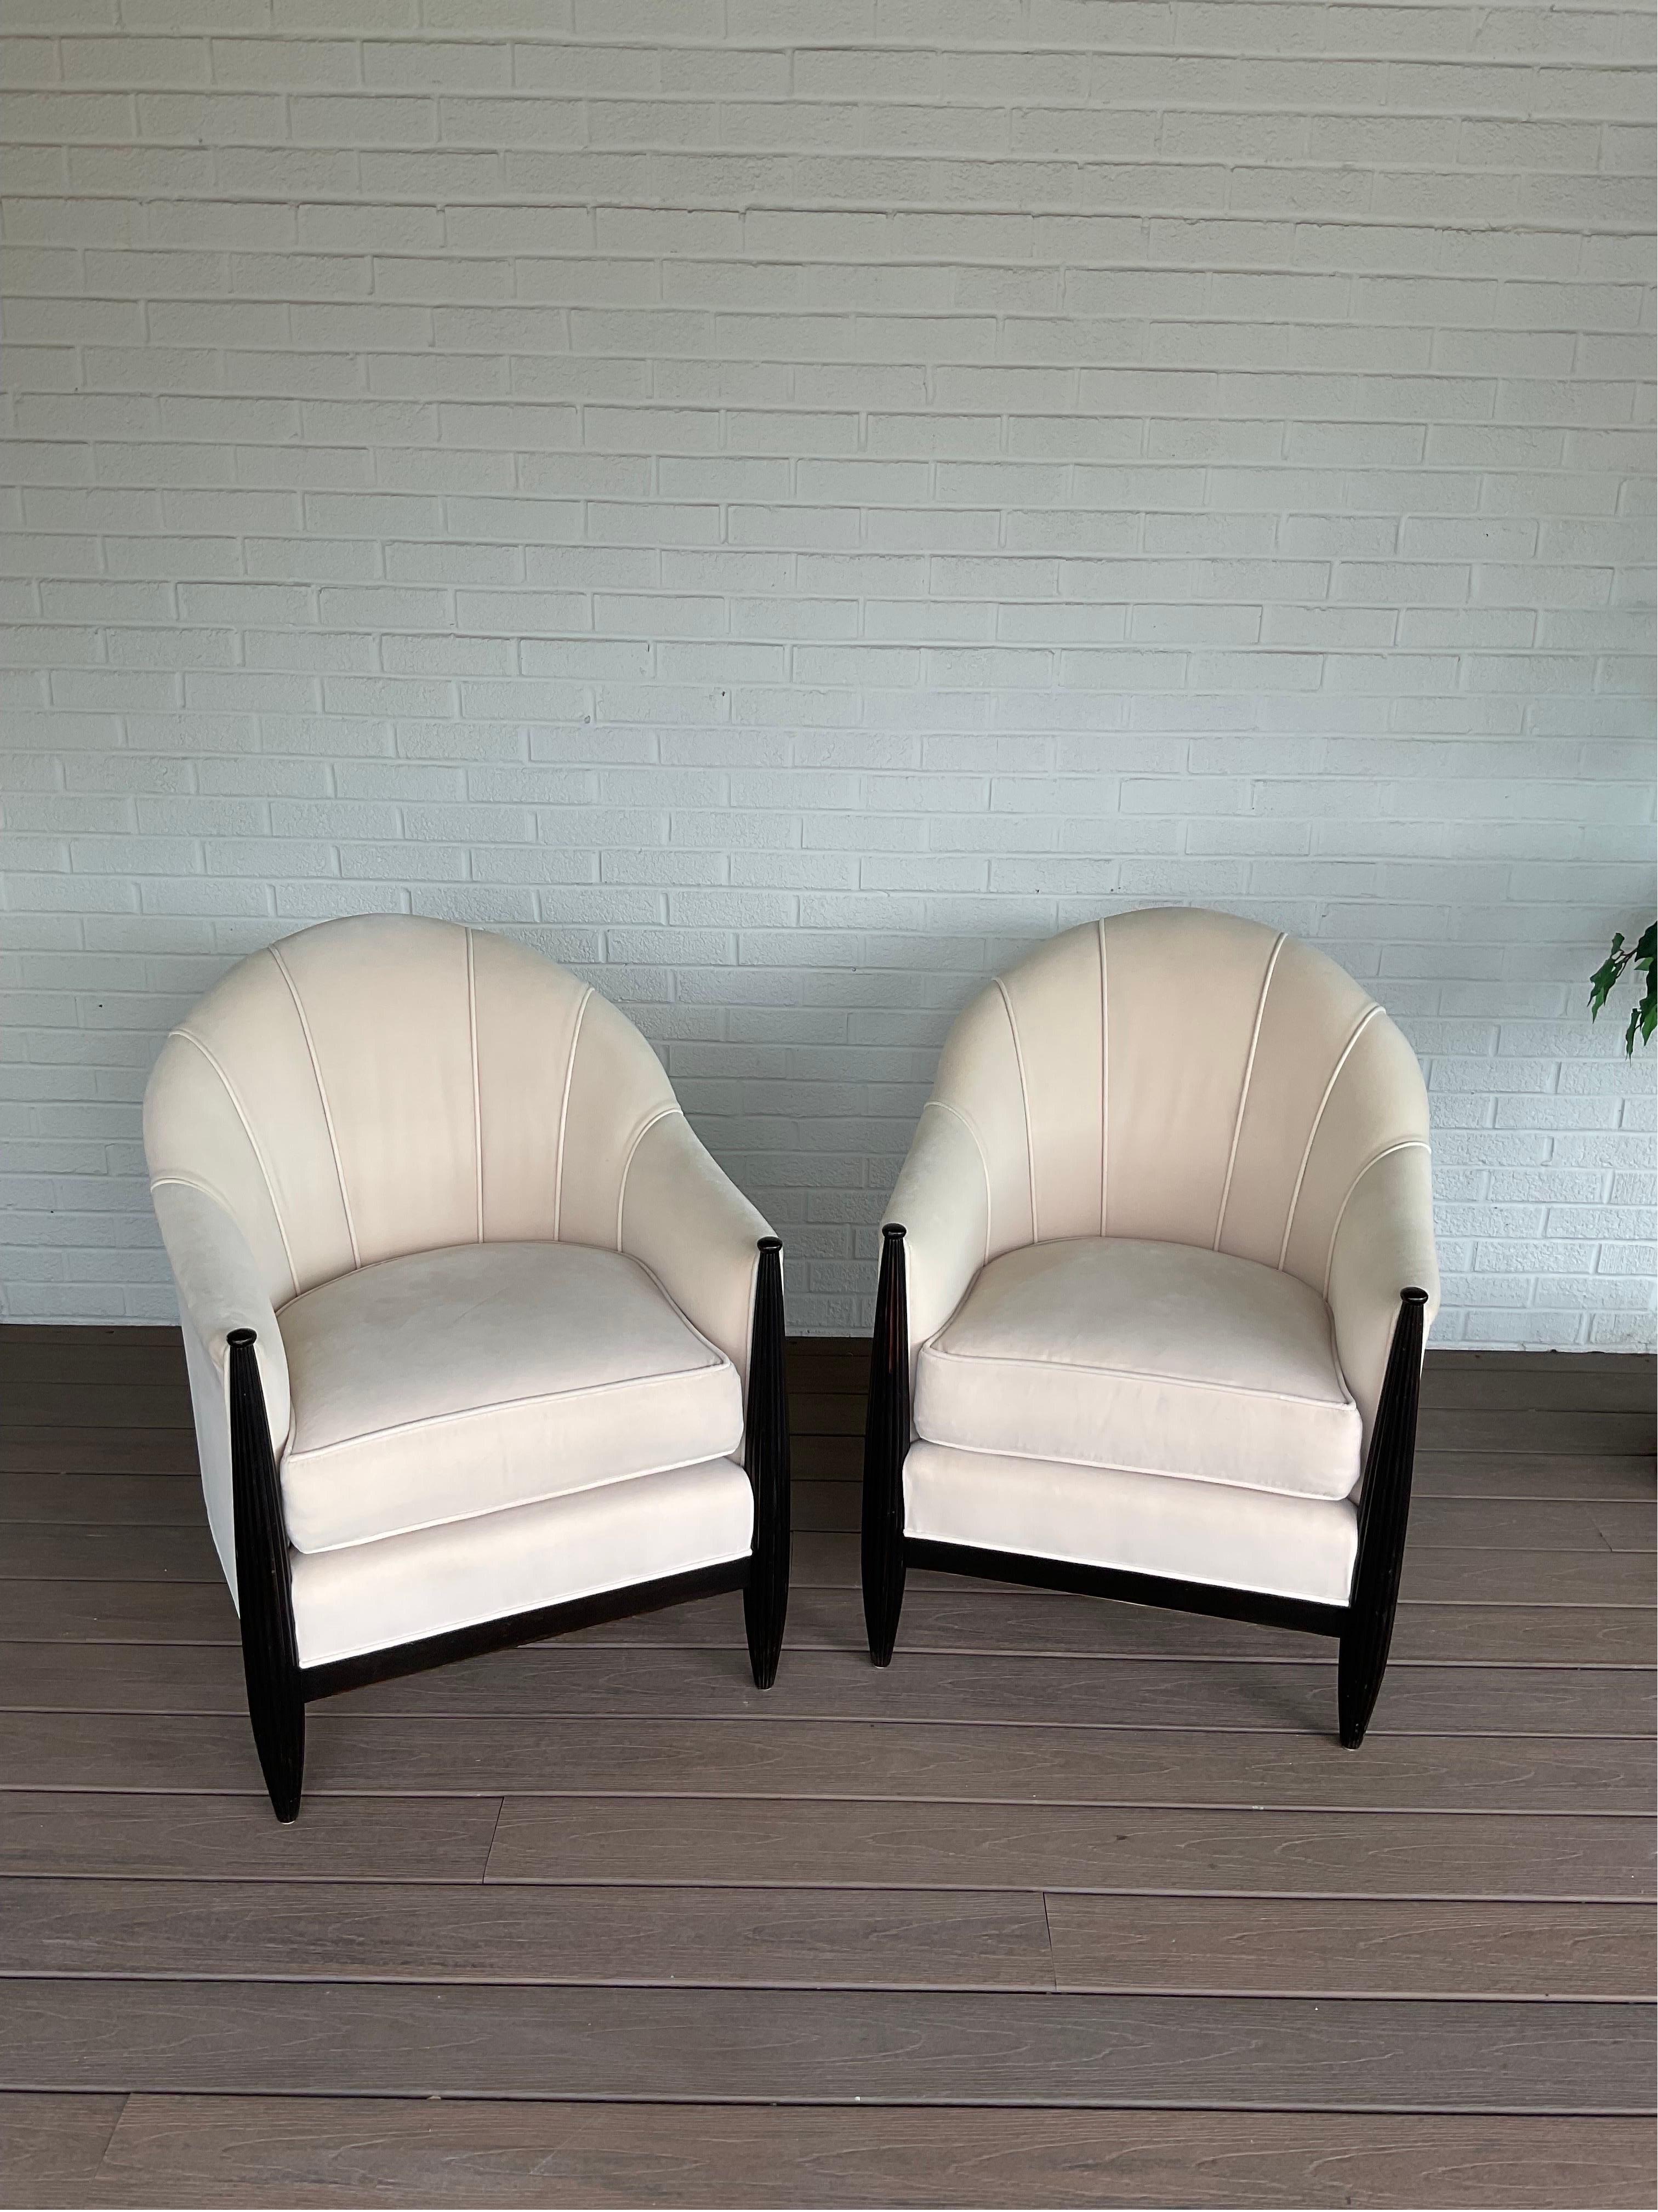 Spectacular pair of Art Deco Club chairs by Swaim still wrapped in their original upholstery nearly 24 years later. Original cost of over $6000 per chair as new. Beautiful pieces.

Condition Disclosure:
Please understand nearly all of our inventory